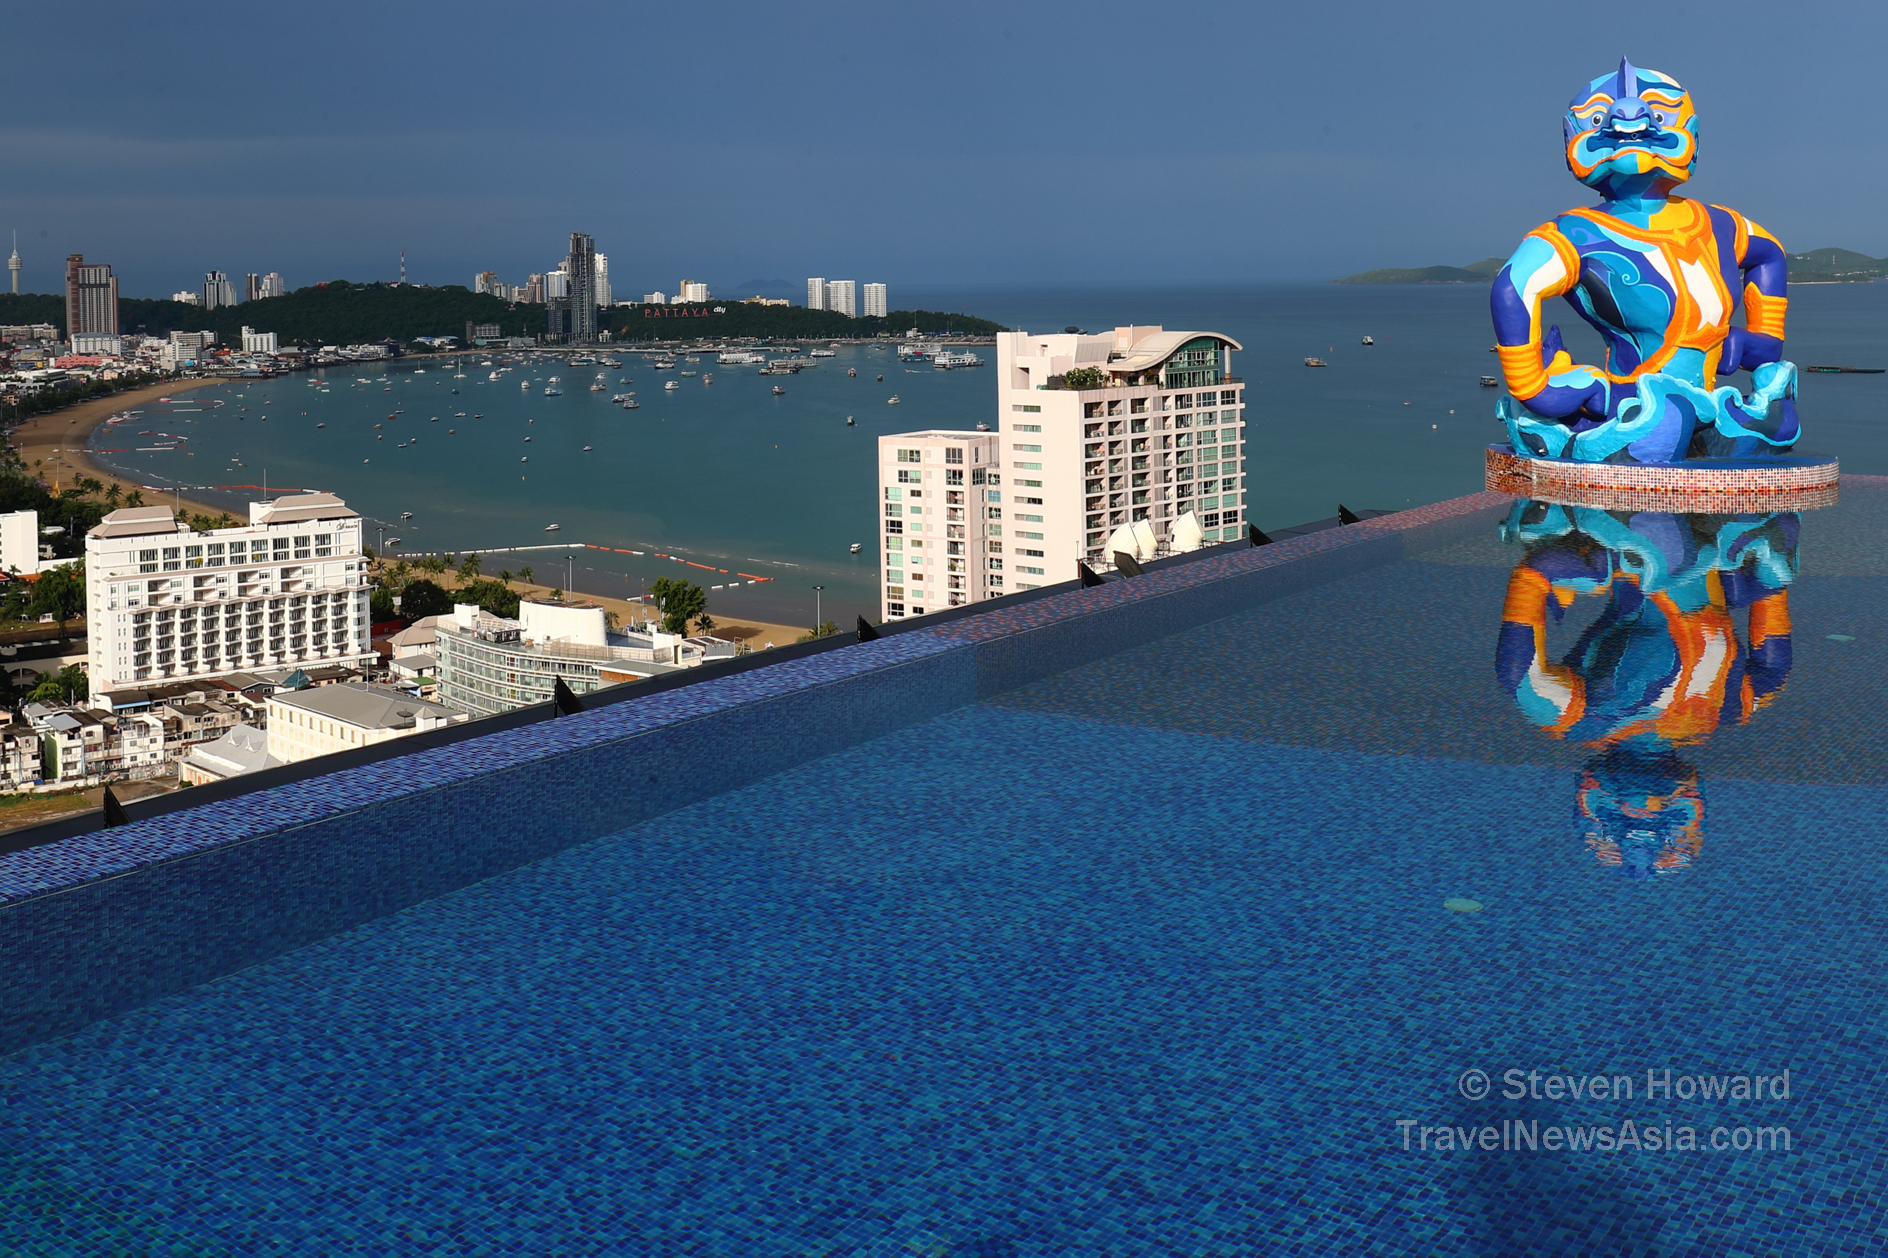 View of Pattaya Beach from the Siam@Siam Design Hotel swimming pool. Picture by Steven Howard of TravelNewsAsia.com Click to enlarge.